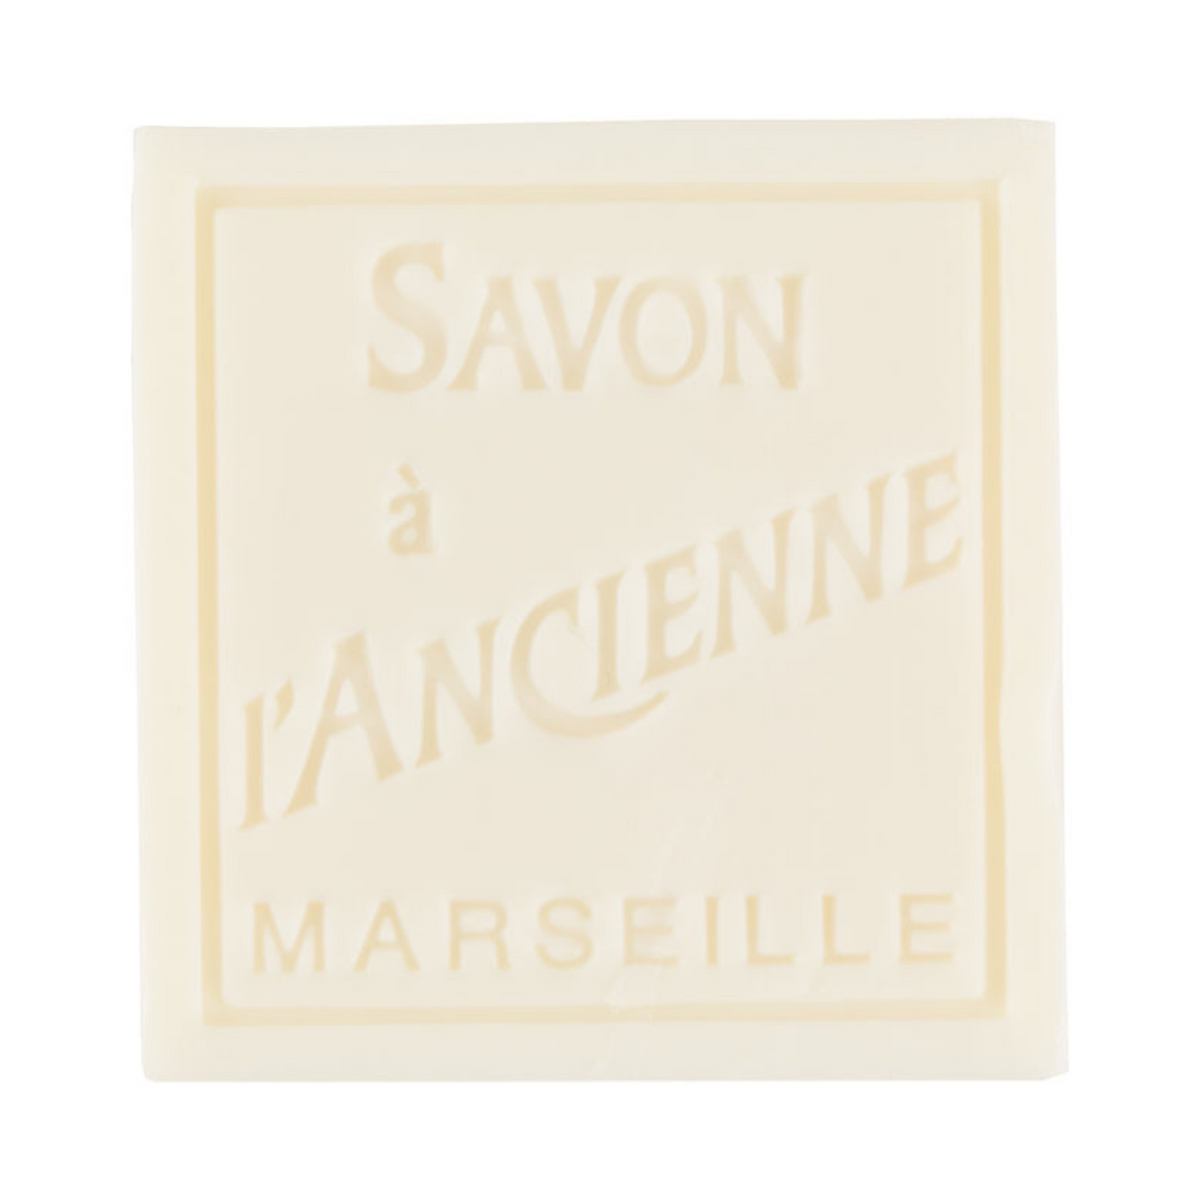 Primary Image of 72% Marseille Soap Cube